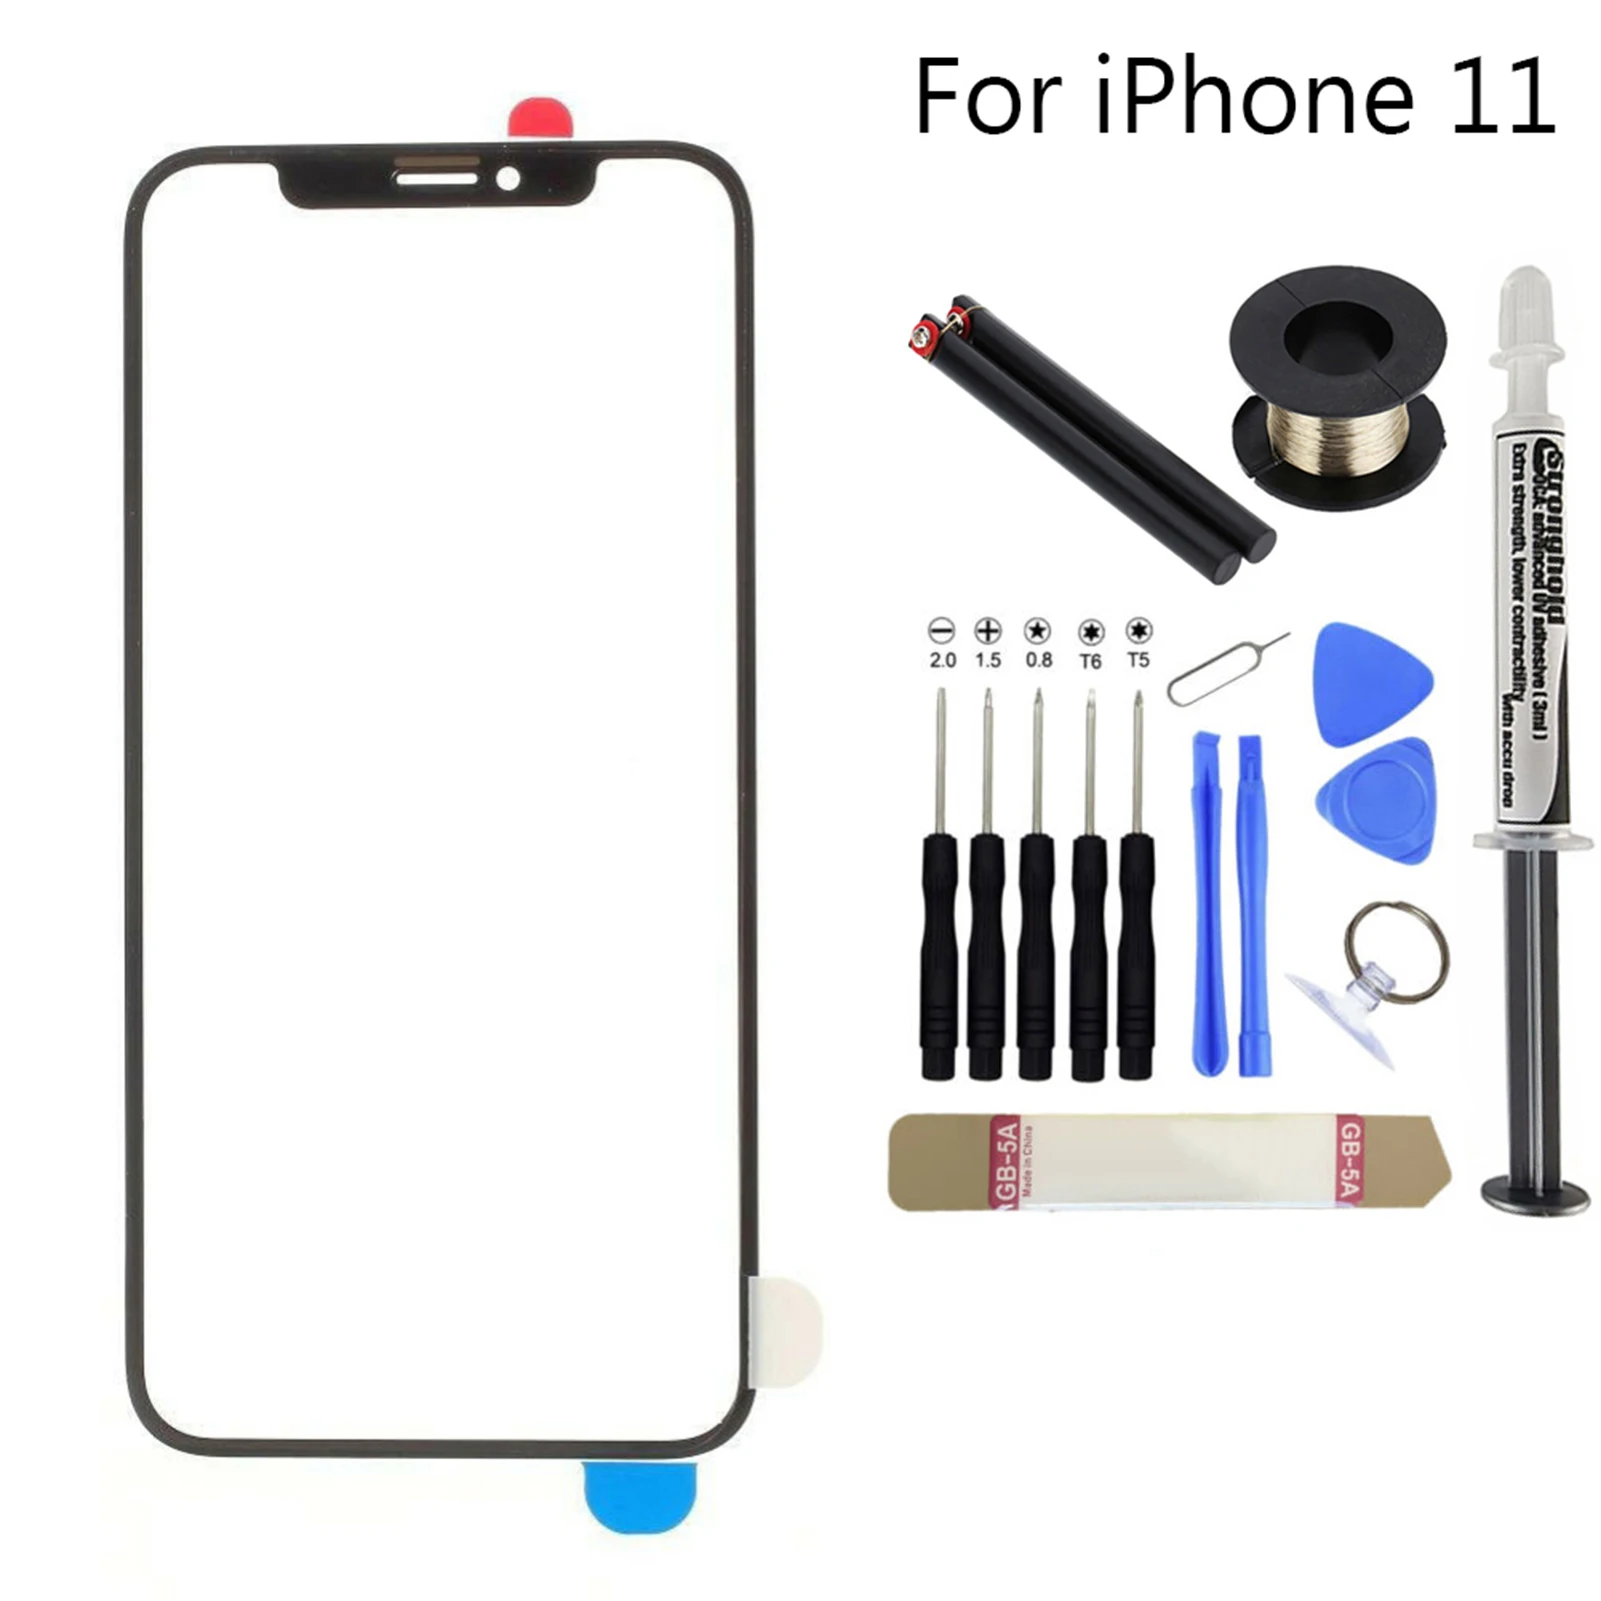 replacement screen front glass lens cover uv loca glue kit for iphone xxrxs screen protector free global shipping